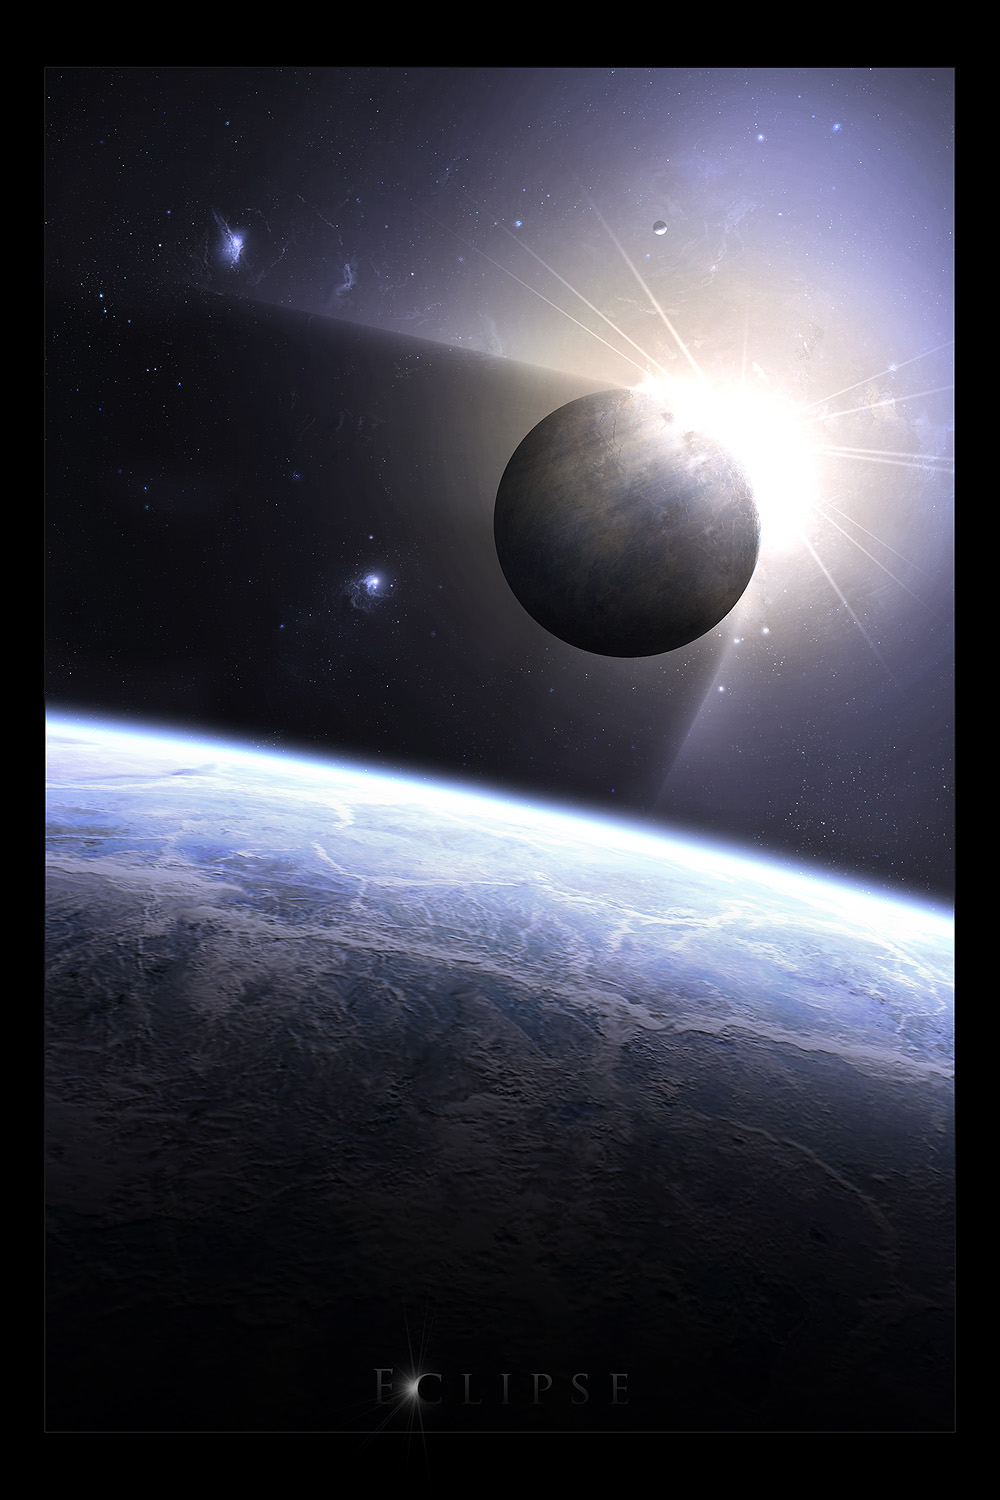 Triple Eclipse – Is it the beginning of Great Fall